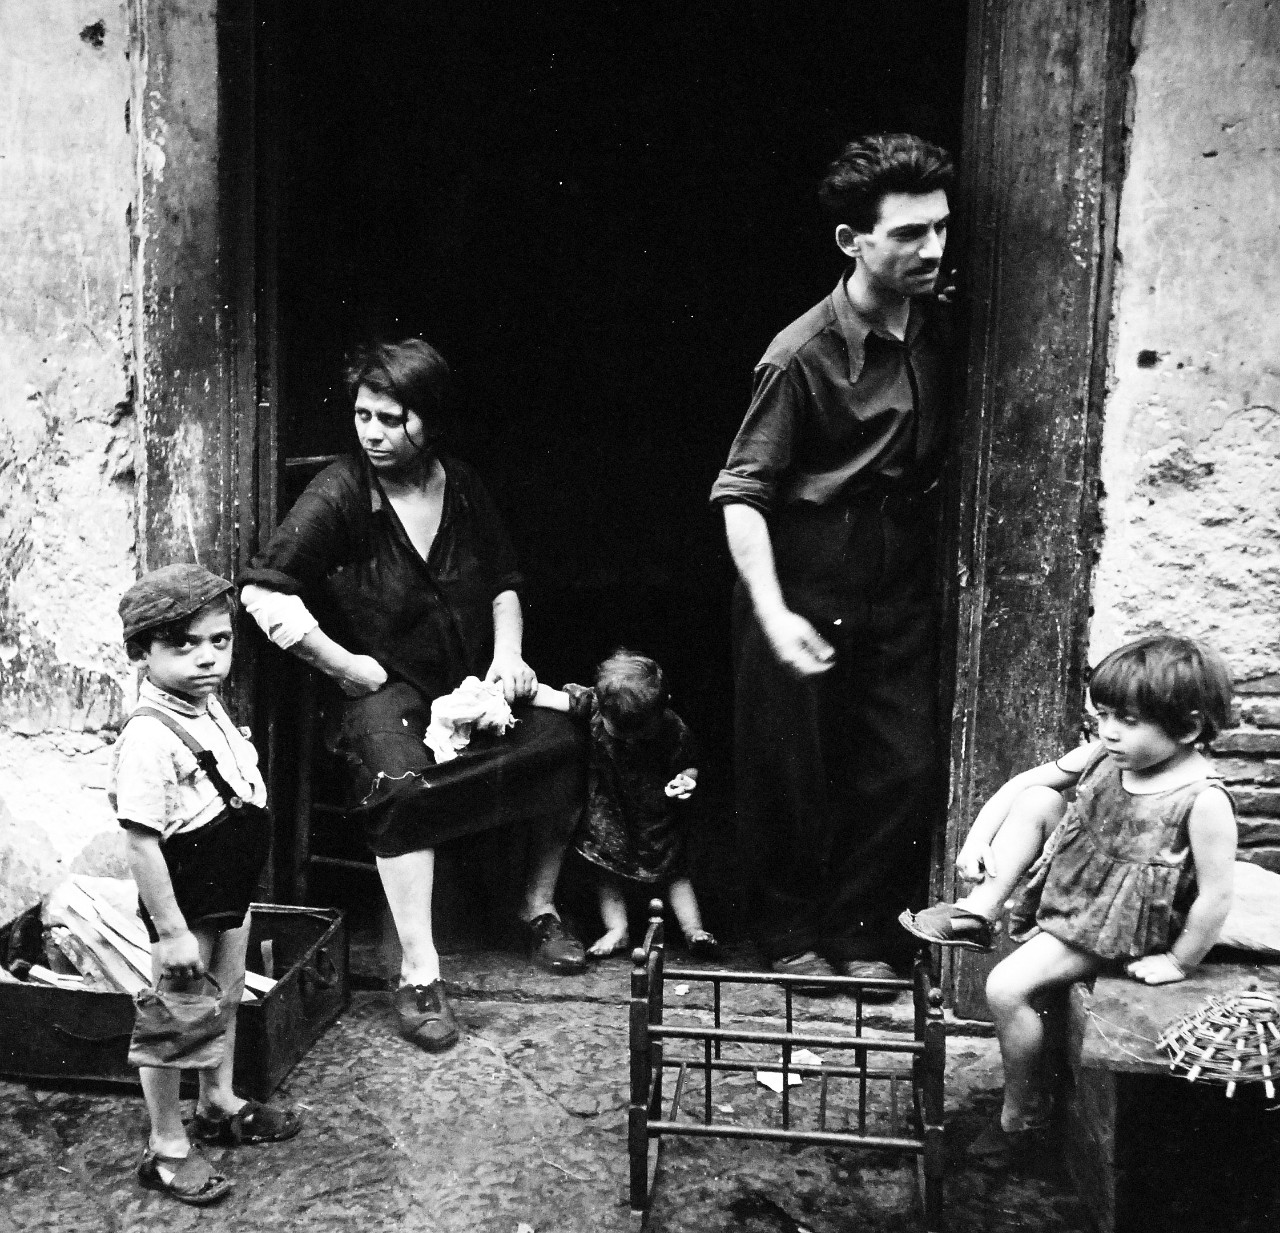 80-G-474143:   Naples, Italy, August 1944.   Children play while mother works. Steichen Photograph Unit:  Photographed by Lieutenant Wayne Miller, August 1944.  TR-13030.  Official U.S. Navy Photograph, now in the collections of the National Archives. (2015/12/08). 